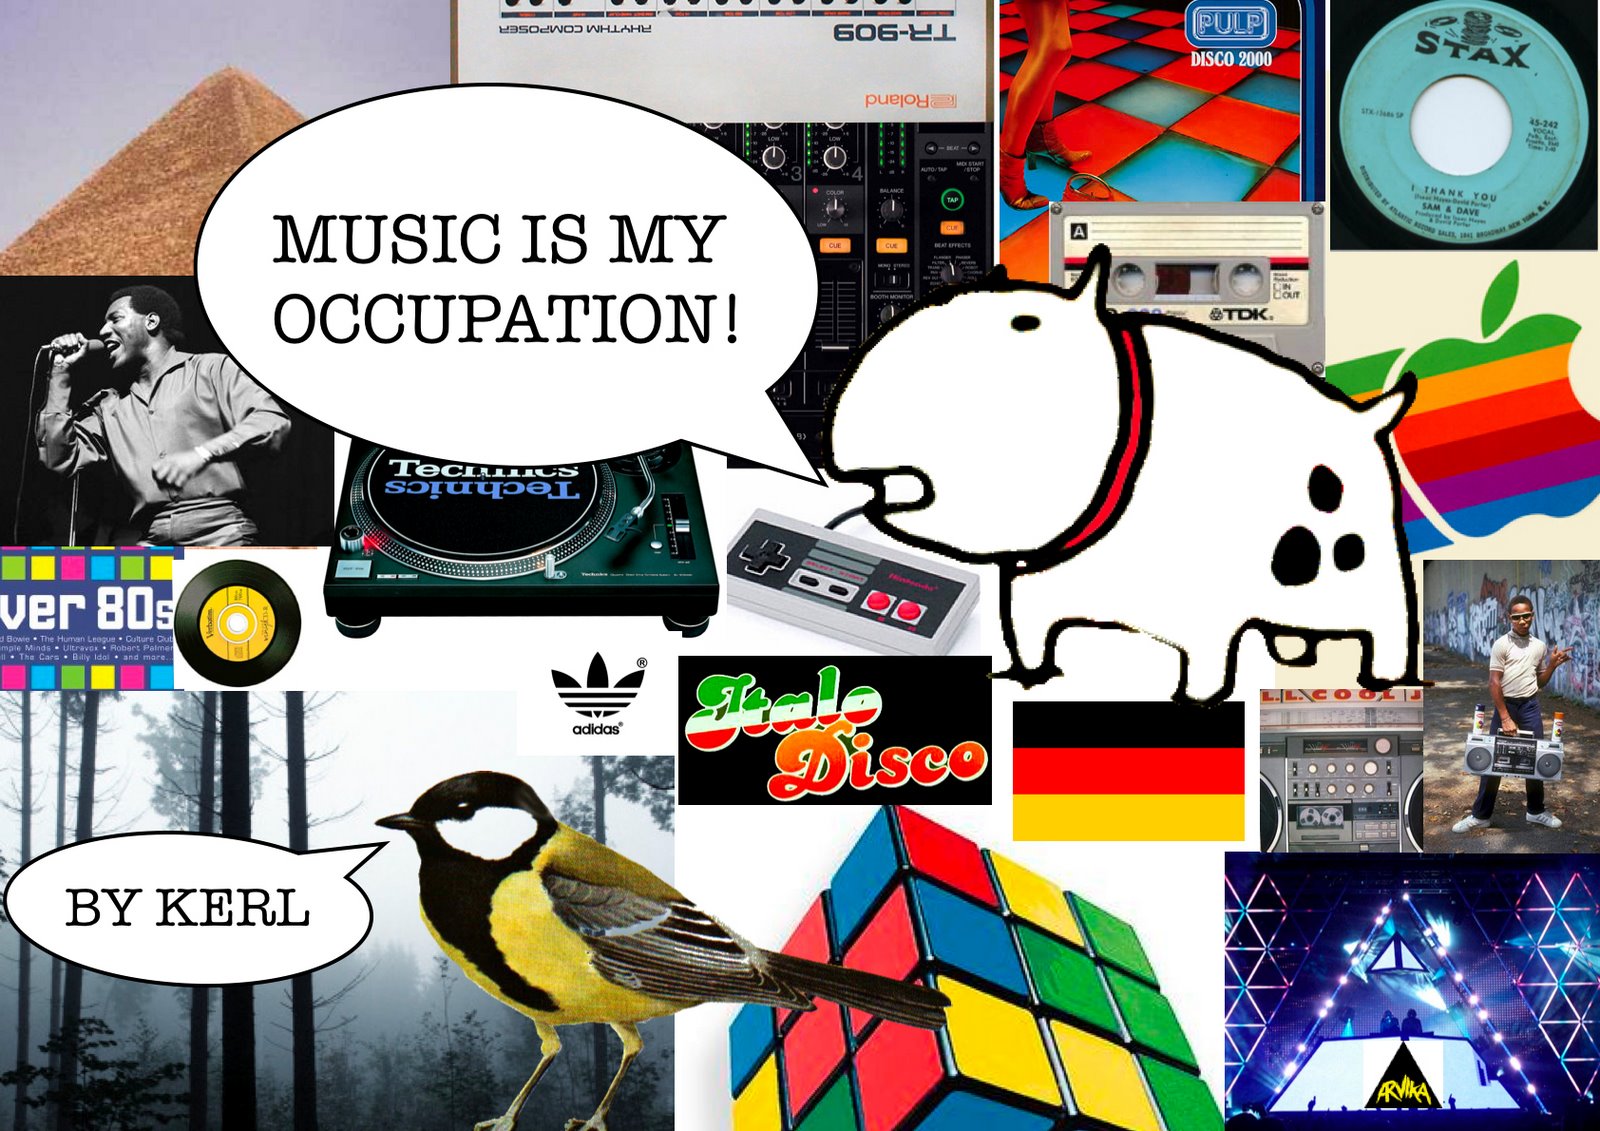 Music is my occupation